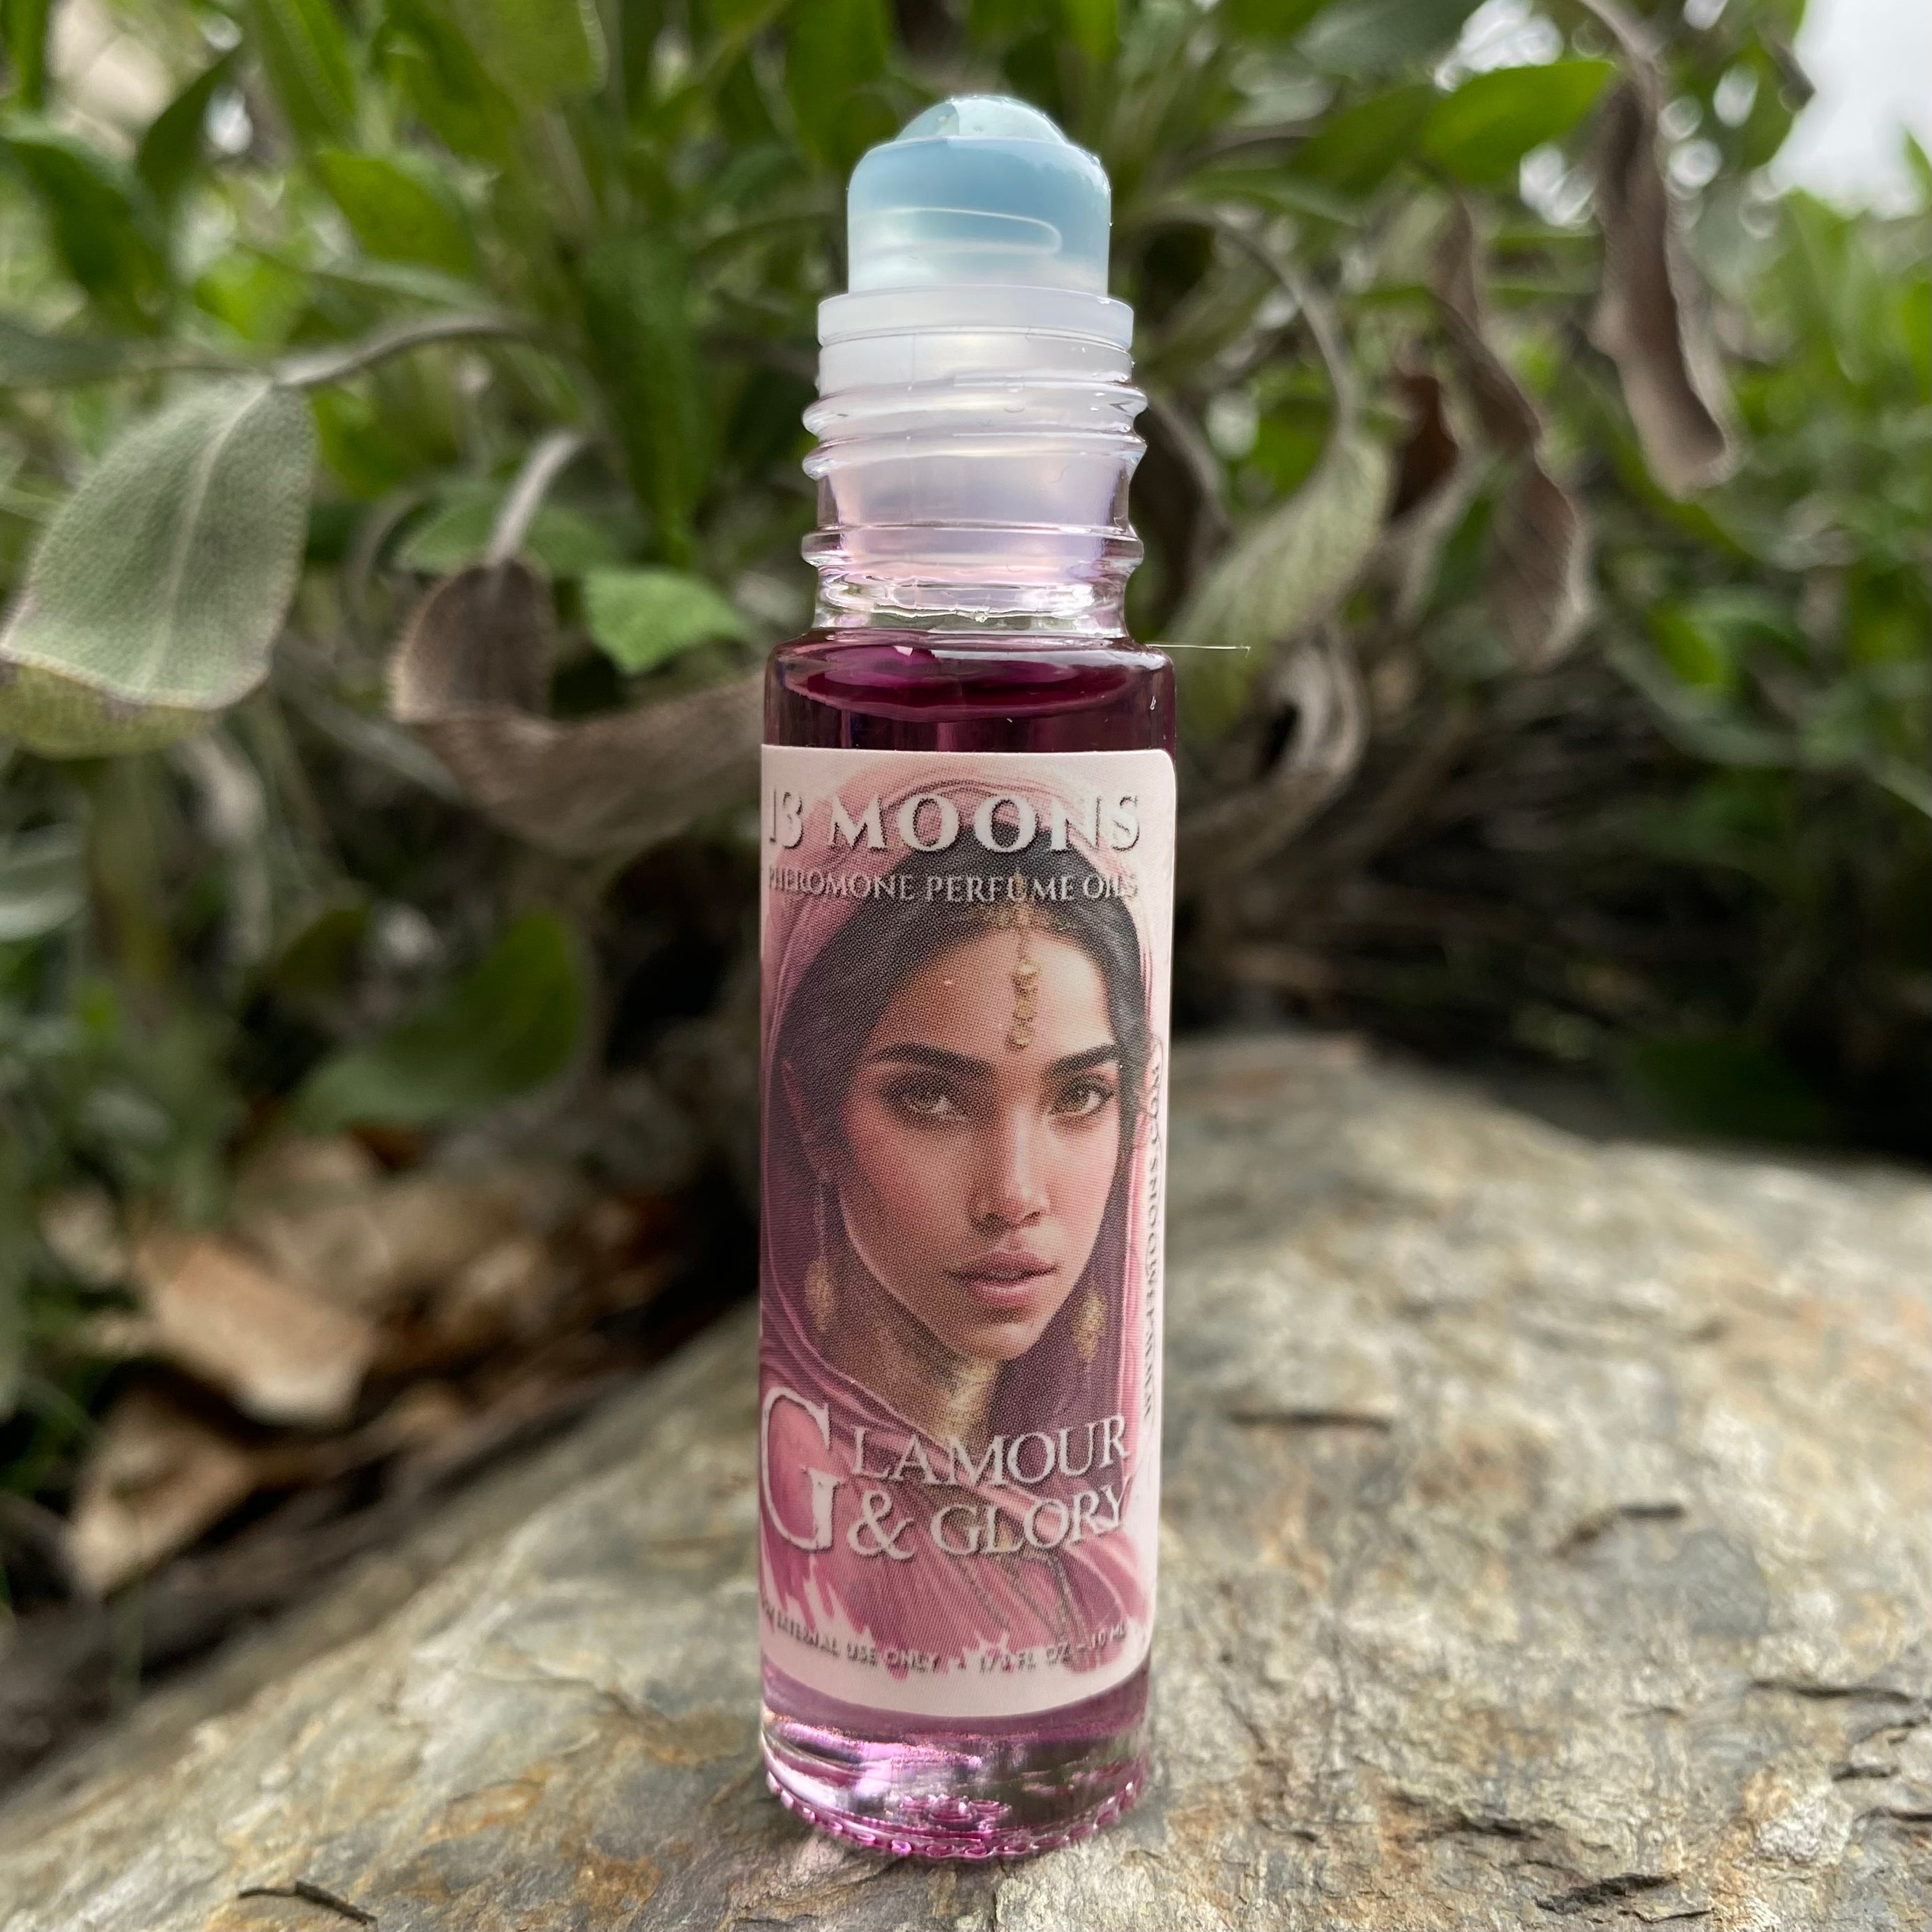 Glamour and Glory Pheromone Infused Perfume Oil by 13 Moons